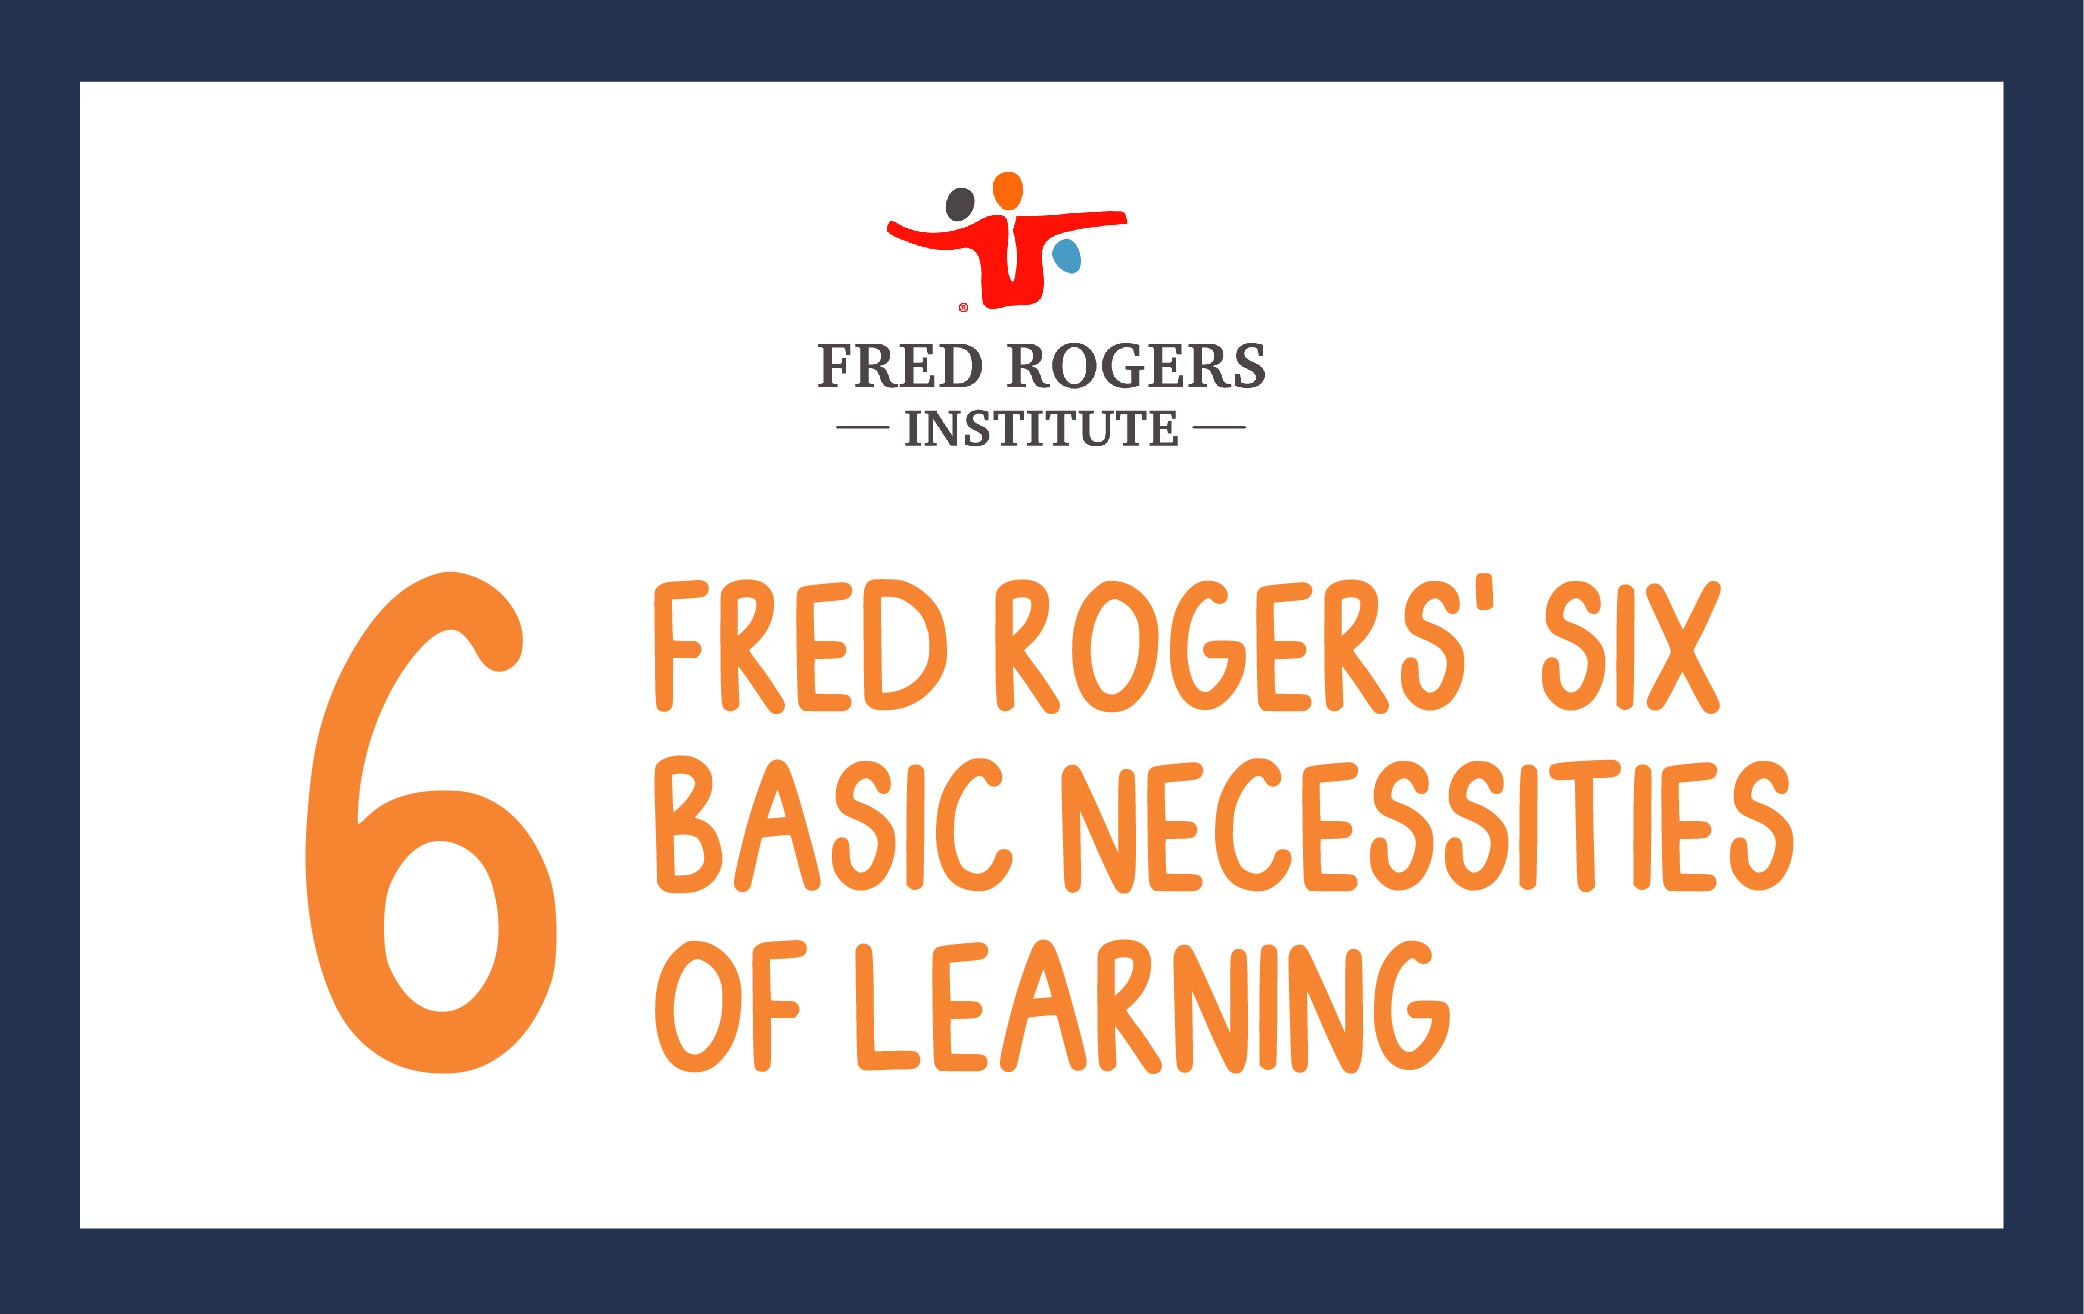 Fred Rogers' Six Basic Necessities of Learning